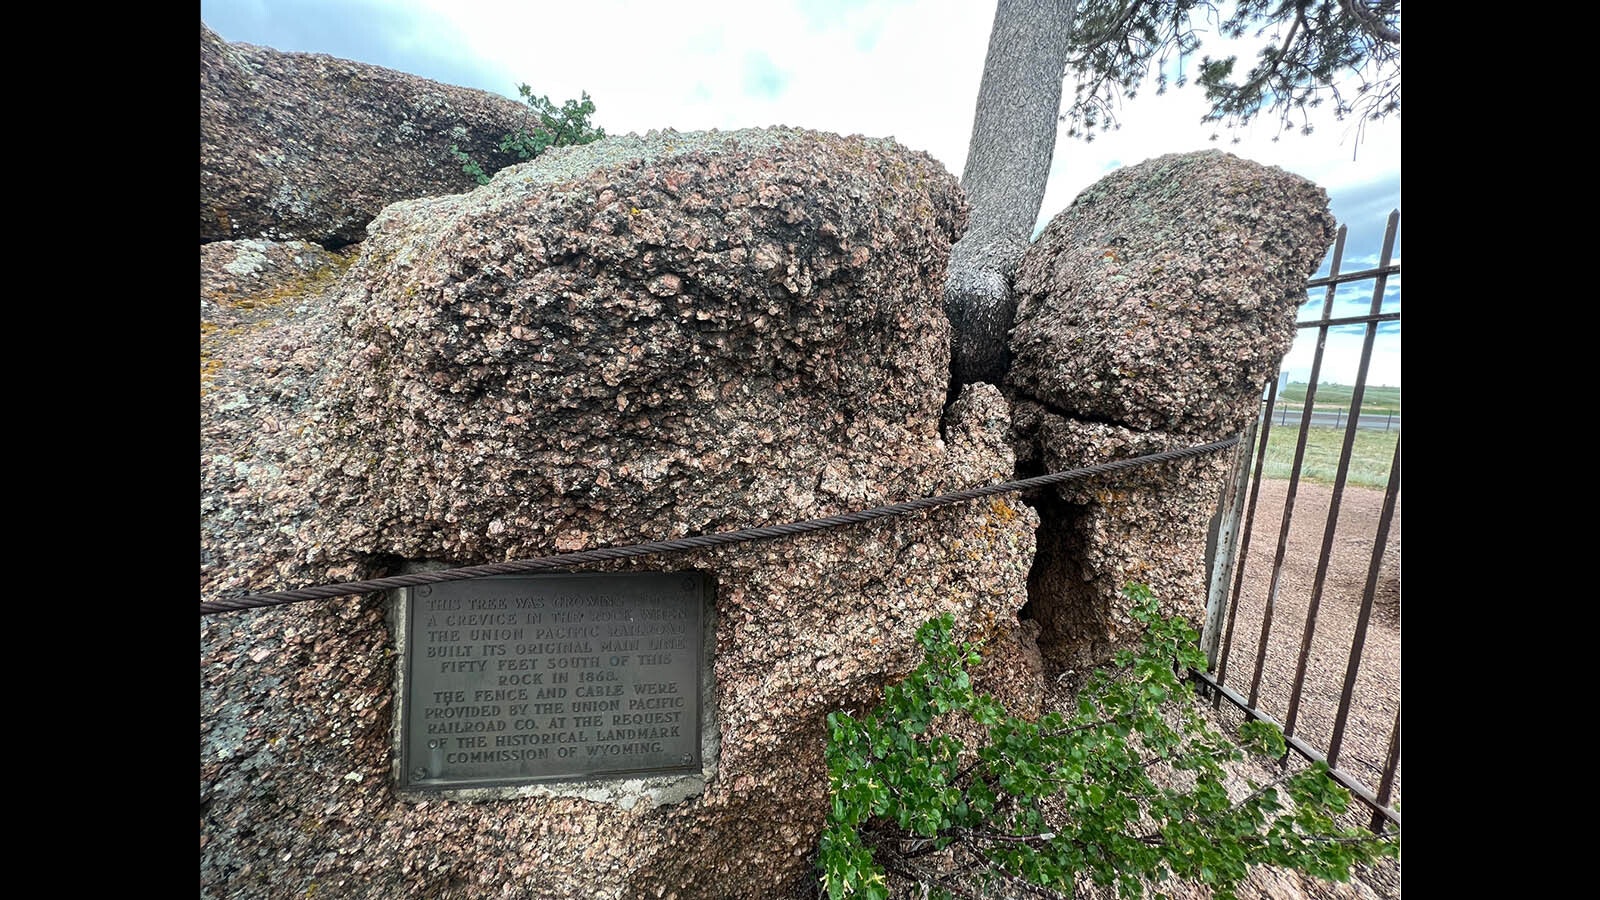 It's weathered and aged now, but this plaque on the side of Tree Rock tells the story of how it was discovered in 1868.